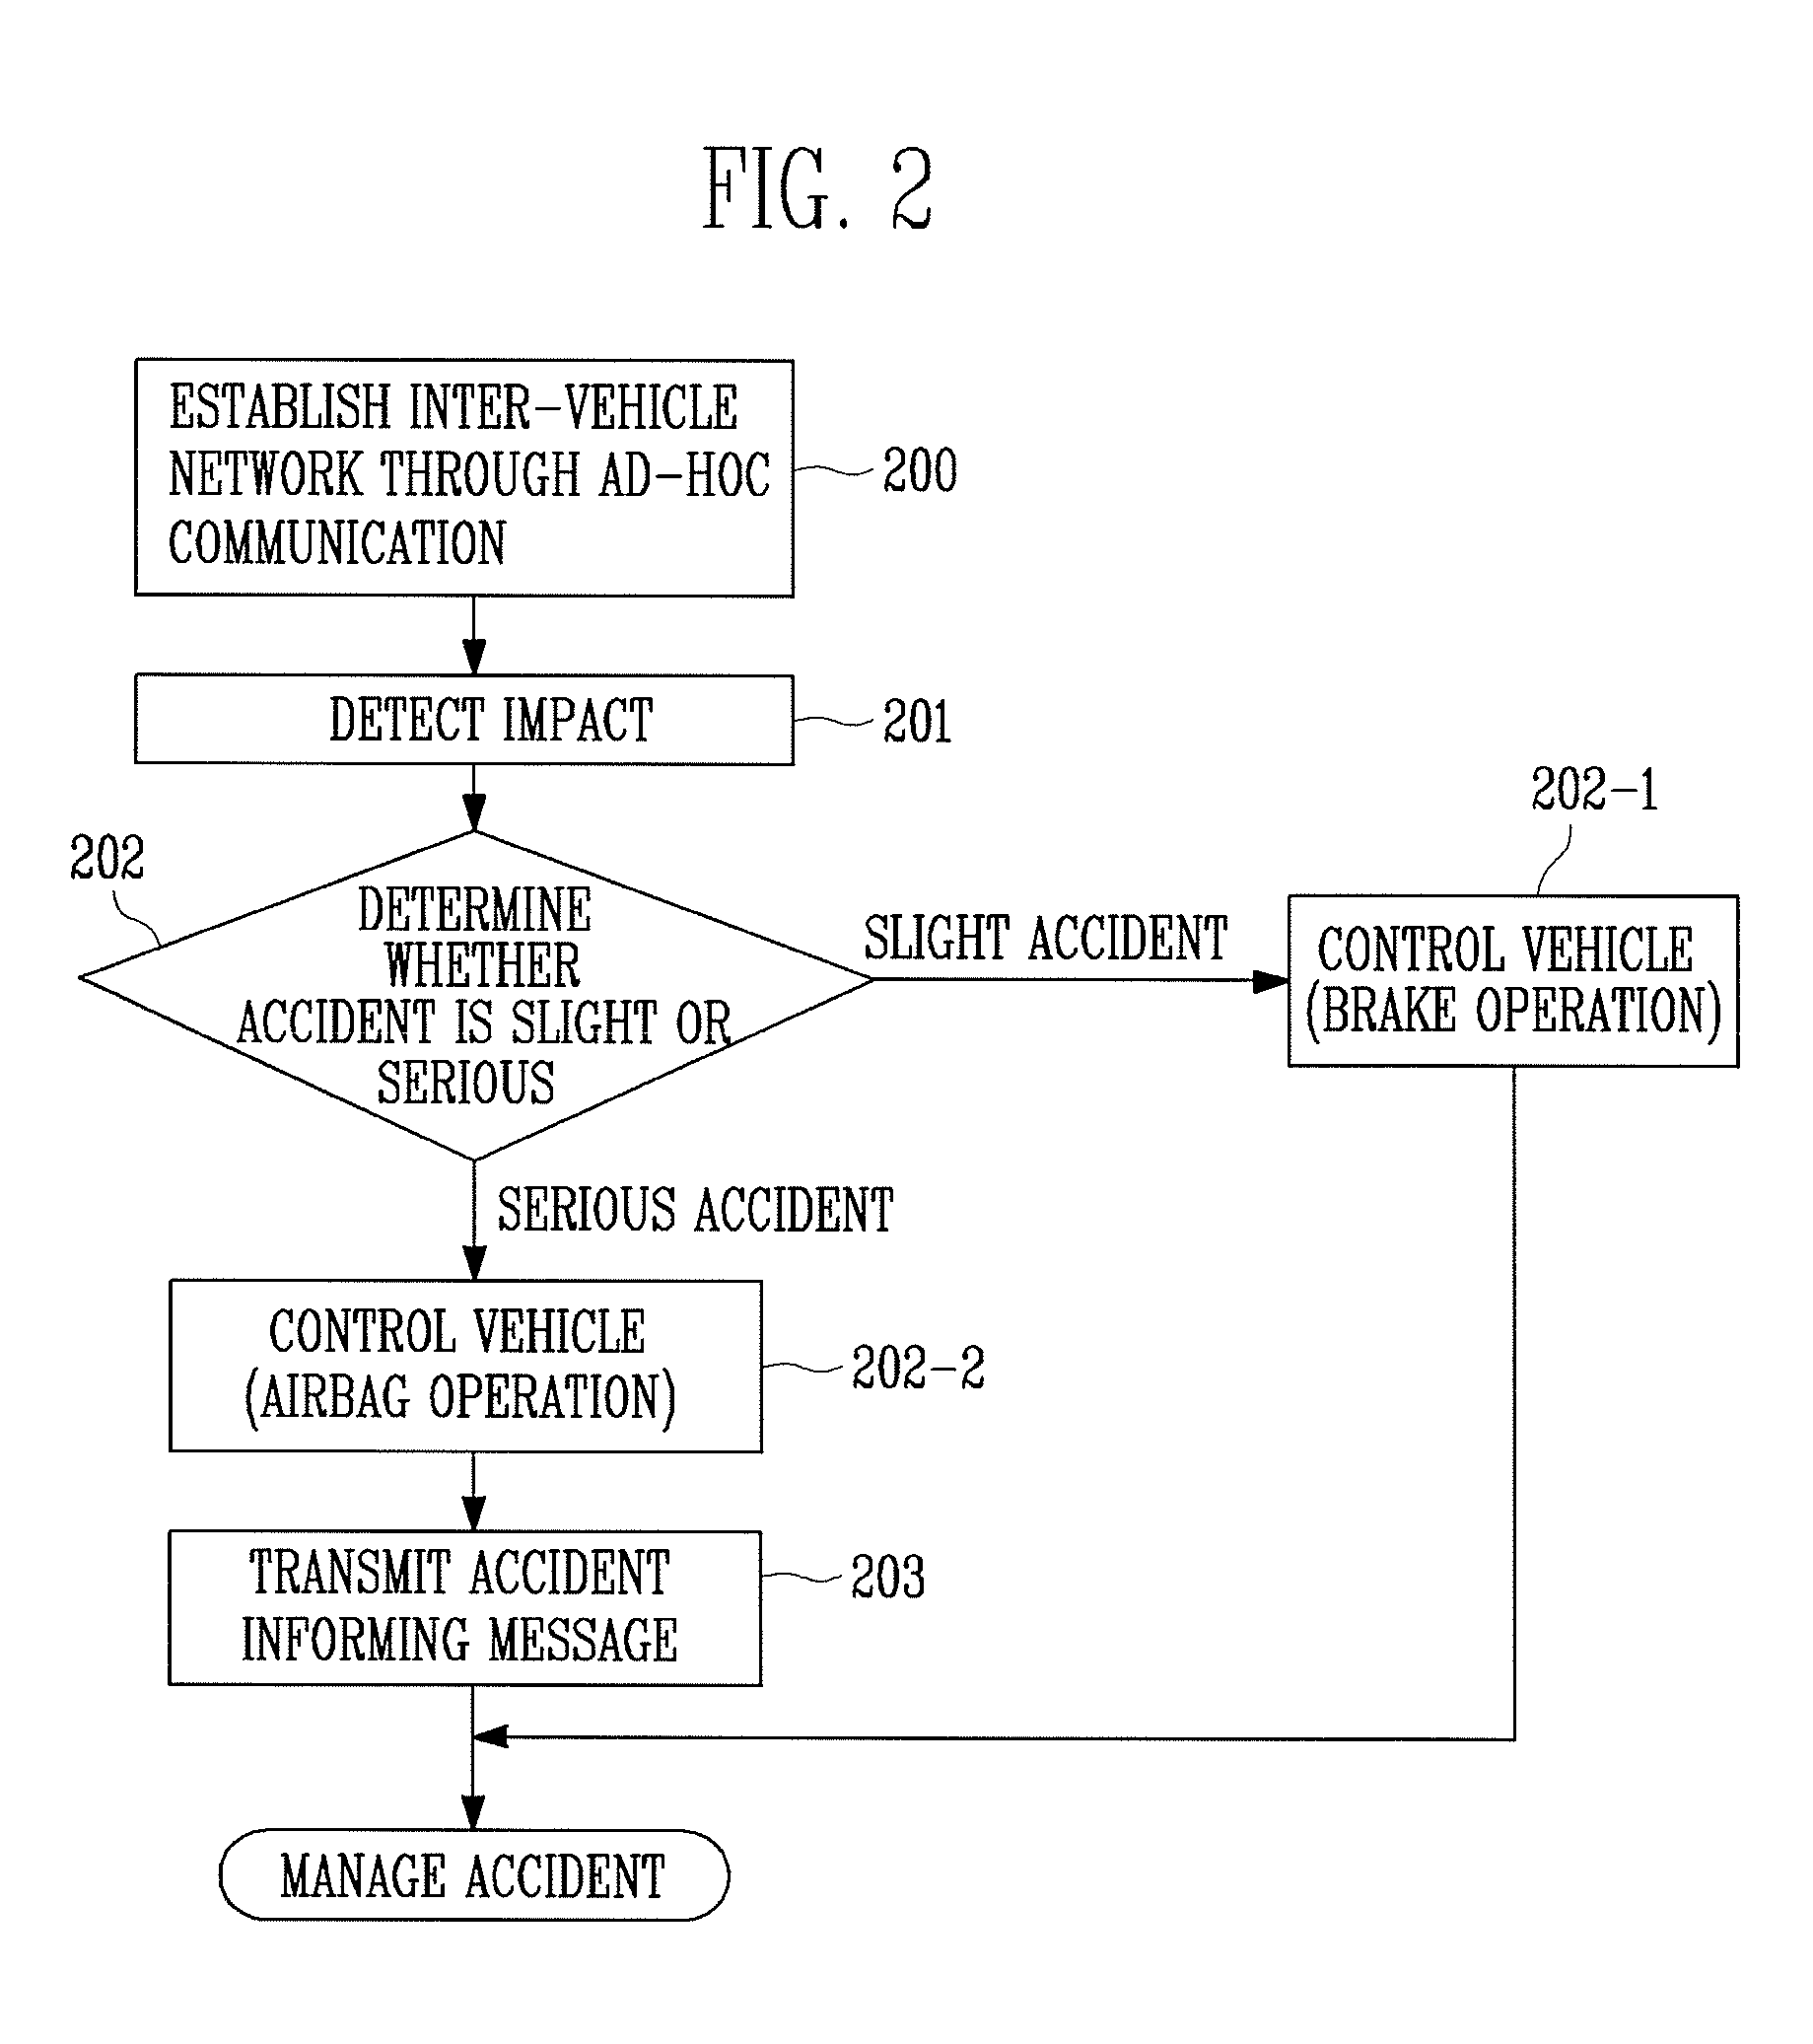 System and method for informing vehicle accident using telematics device